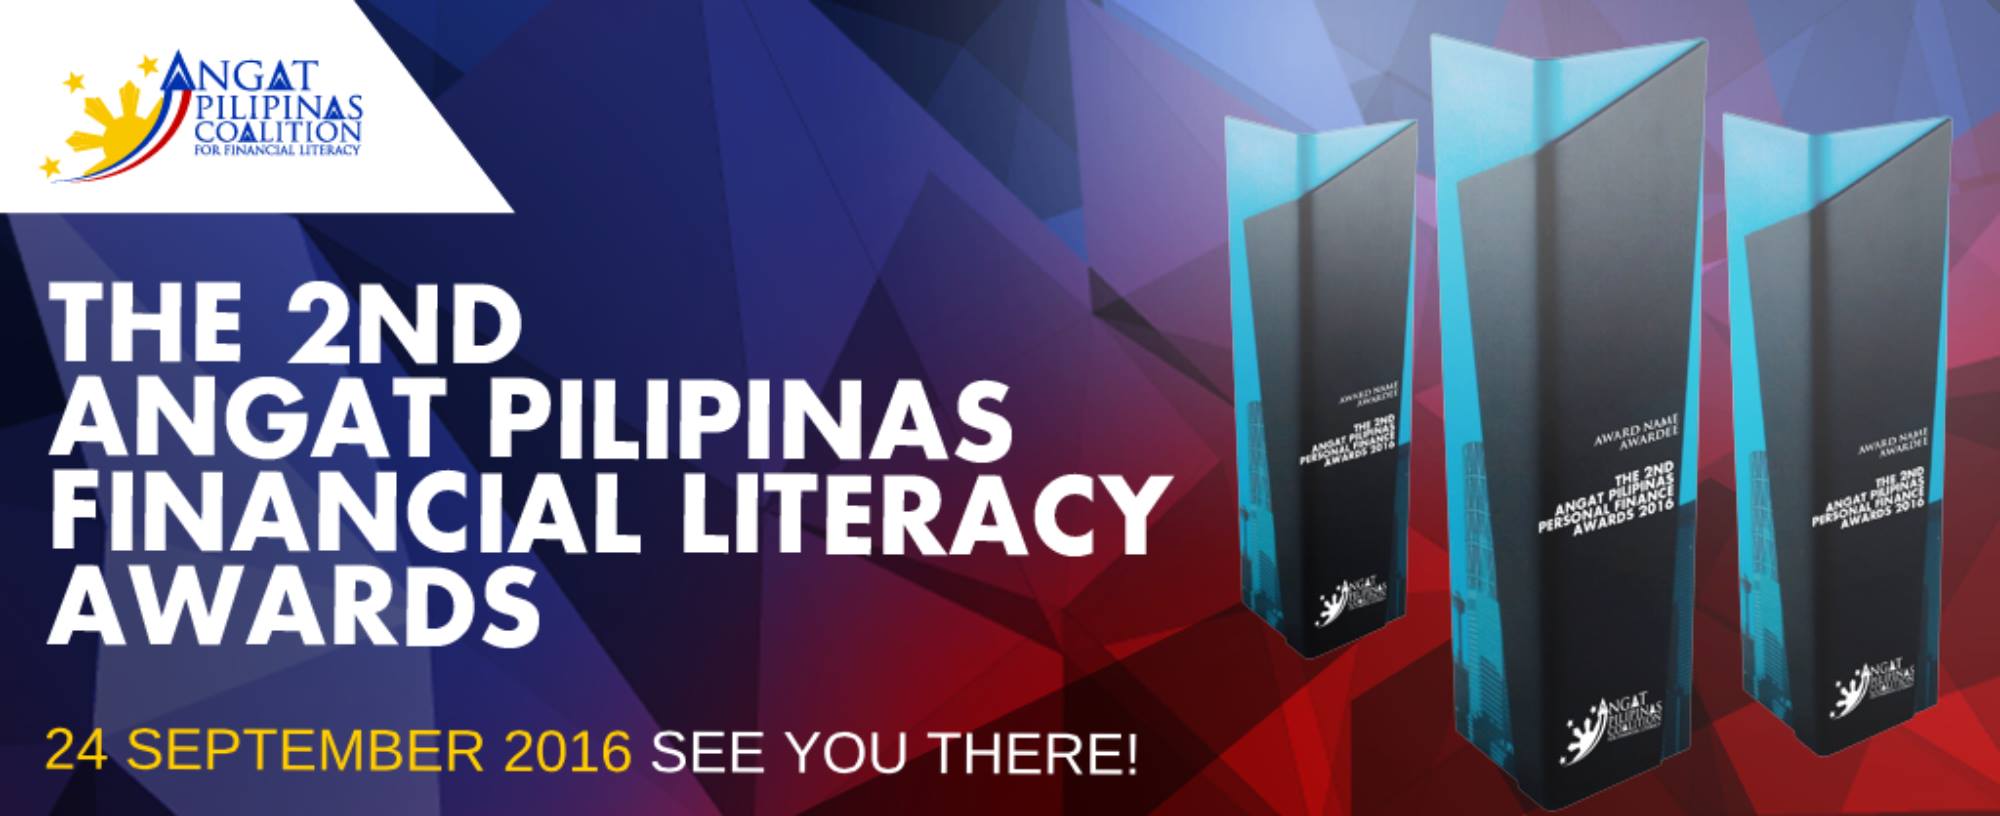 Angat Pilipinas Coalition for Financial Literacy Page Liked · July 22 · LAST CALL! Today is the last day to send in your nominations! Log in here: http://angatph.com/angat-awards-and-nominations/nominatenow/ CATEGORIES OF THE AWARDS a. The Finance Blogger of The Year This award is for the best money blog that showcases excellent and engaging content about personal finance, investing, entrepreneurship, and related contents, judged from viewing the live blog plus supporting entry details. b. The Influential Author of The Year This award is for the Filipino book author that most clearly demonstrates overall excellence in his or her knowledge of personal finance and investing. c. The Institution of The Year This award is for the Philippine bank, financial institution, pooled fund company, stockbrokerage firm, and similar institutions that support financial literacy in the Philippines. d. Advocacy Group/Partner of The Year This award is for the Organization or Group that offers a financial literacy program for Filipinos, though it need not be a financial literacy organization by mission. e. OFW Advocate of the Year This award will honor the expat Pinoy who is a personal financial education advocate and has excelled in grassroots financial literacy advocacy among his fellow OFW’s and Filipinos based abroad. http://angatph.com/angat-awards-and-nominations/nominatenow/